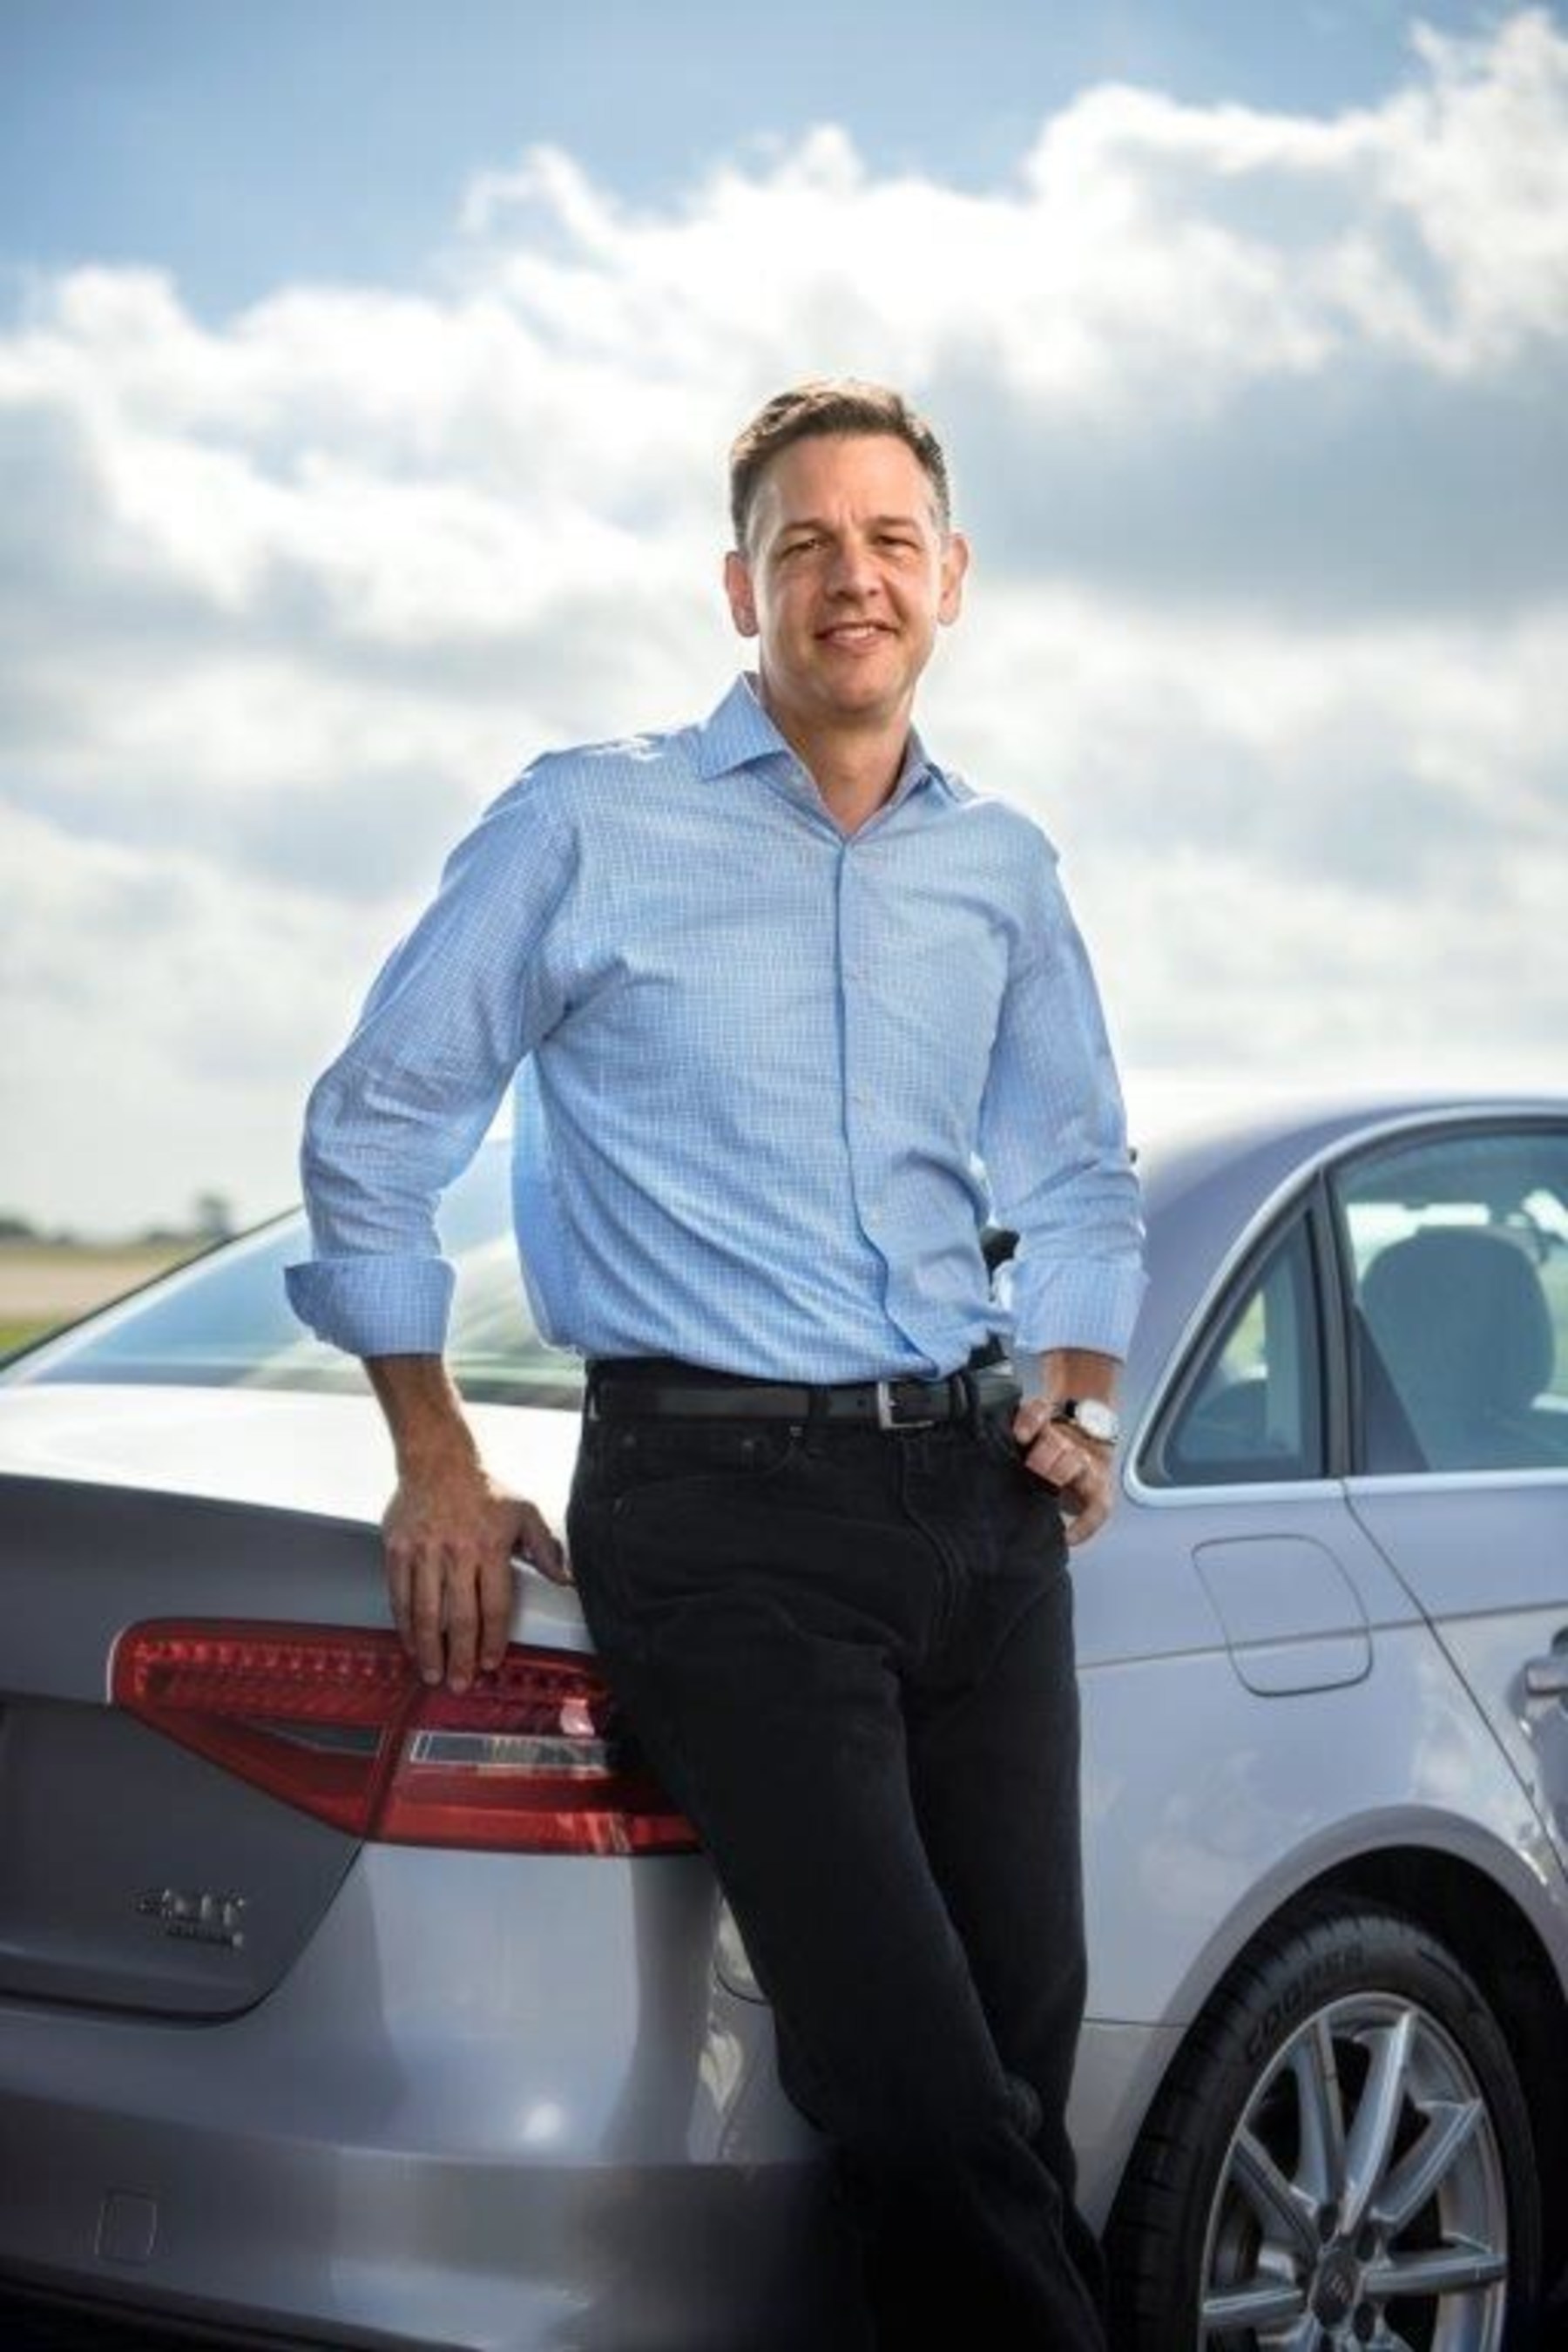 Luke Schneider, CEO of Silvercar, has directed the company through its largest capital raise to date with a $28 million Series C equity issuance led by Audi